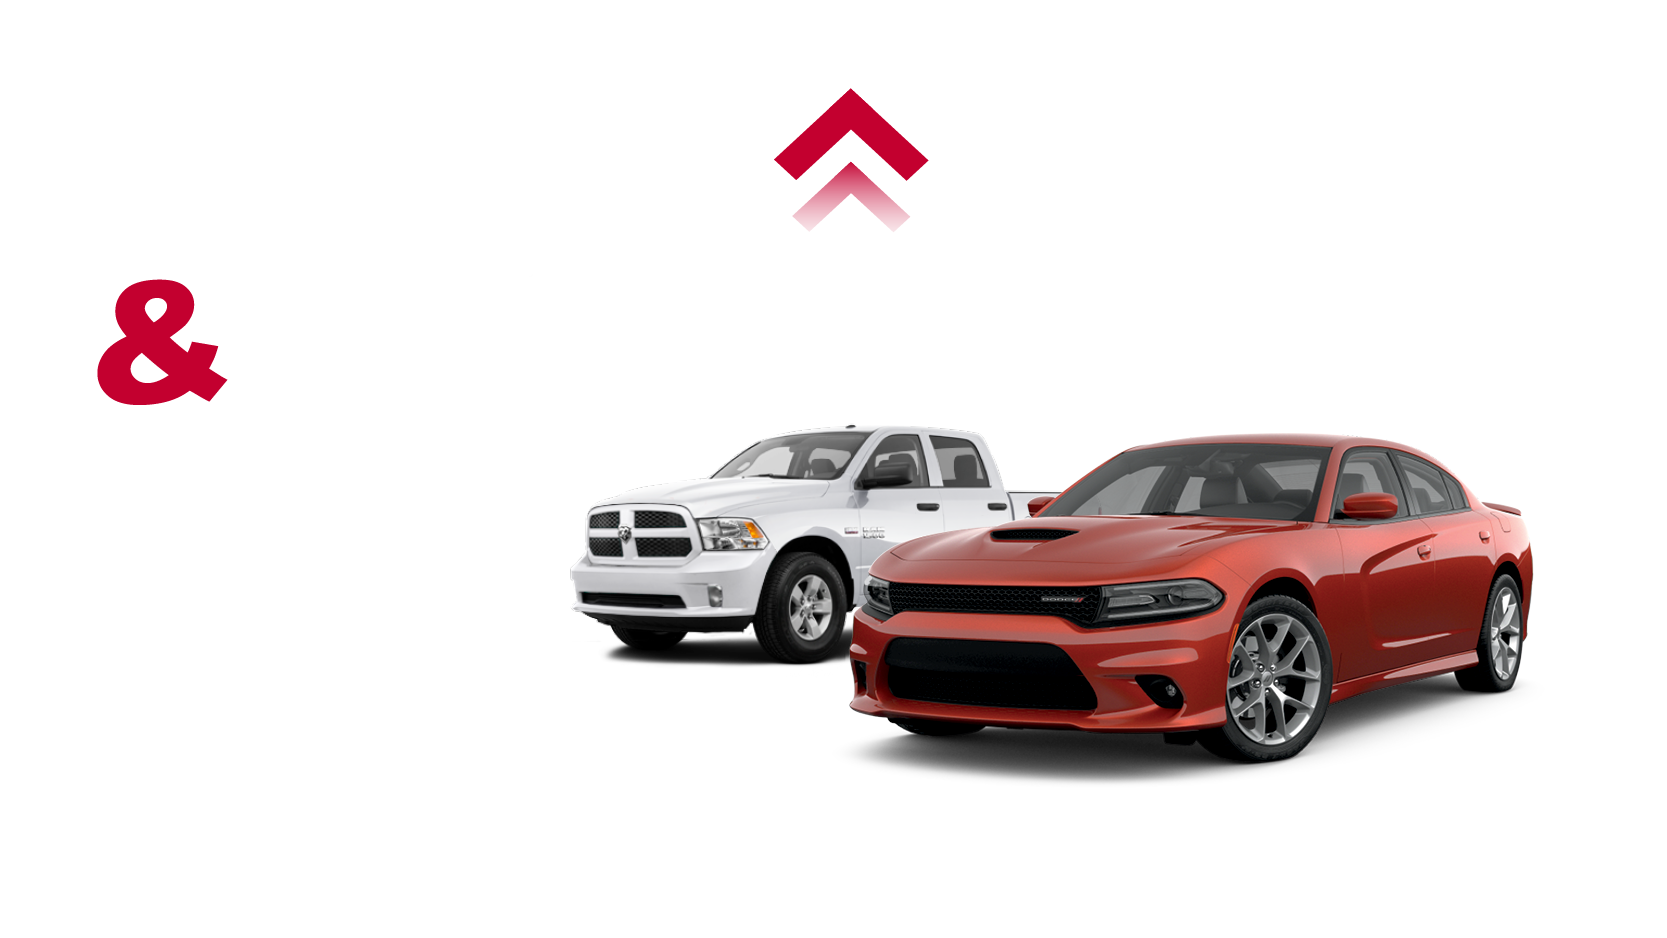 Trade-in & Trade-up Event!